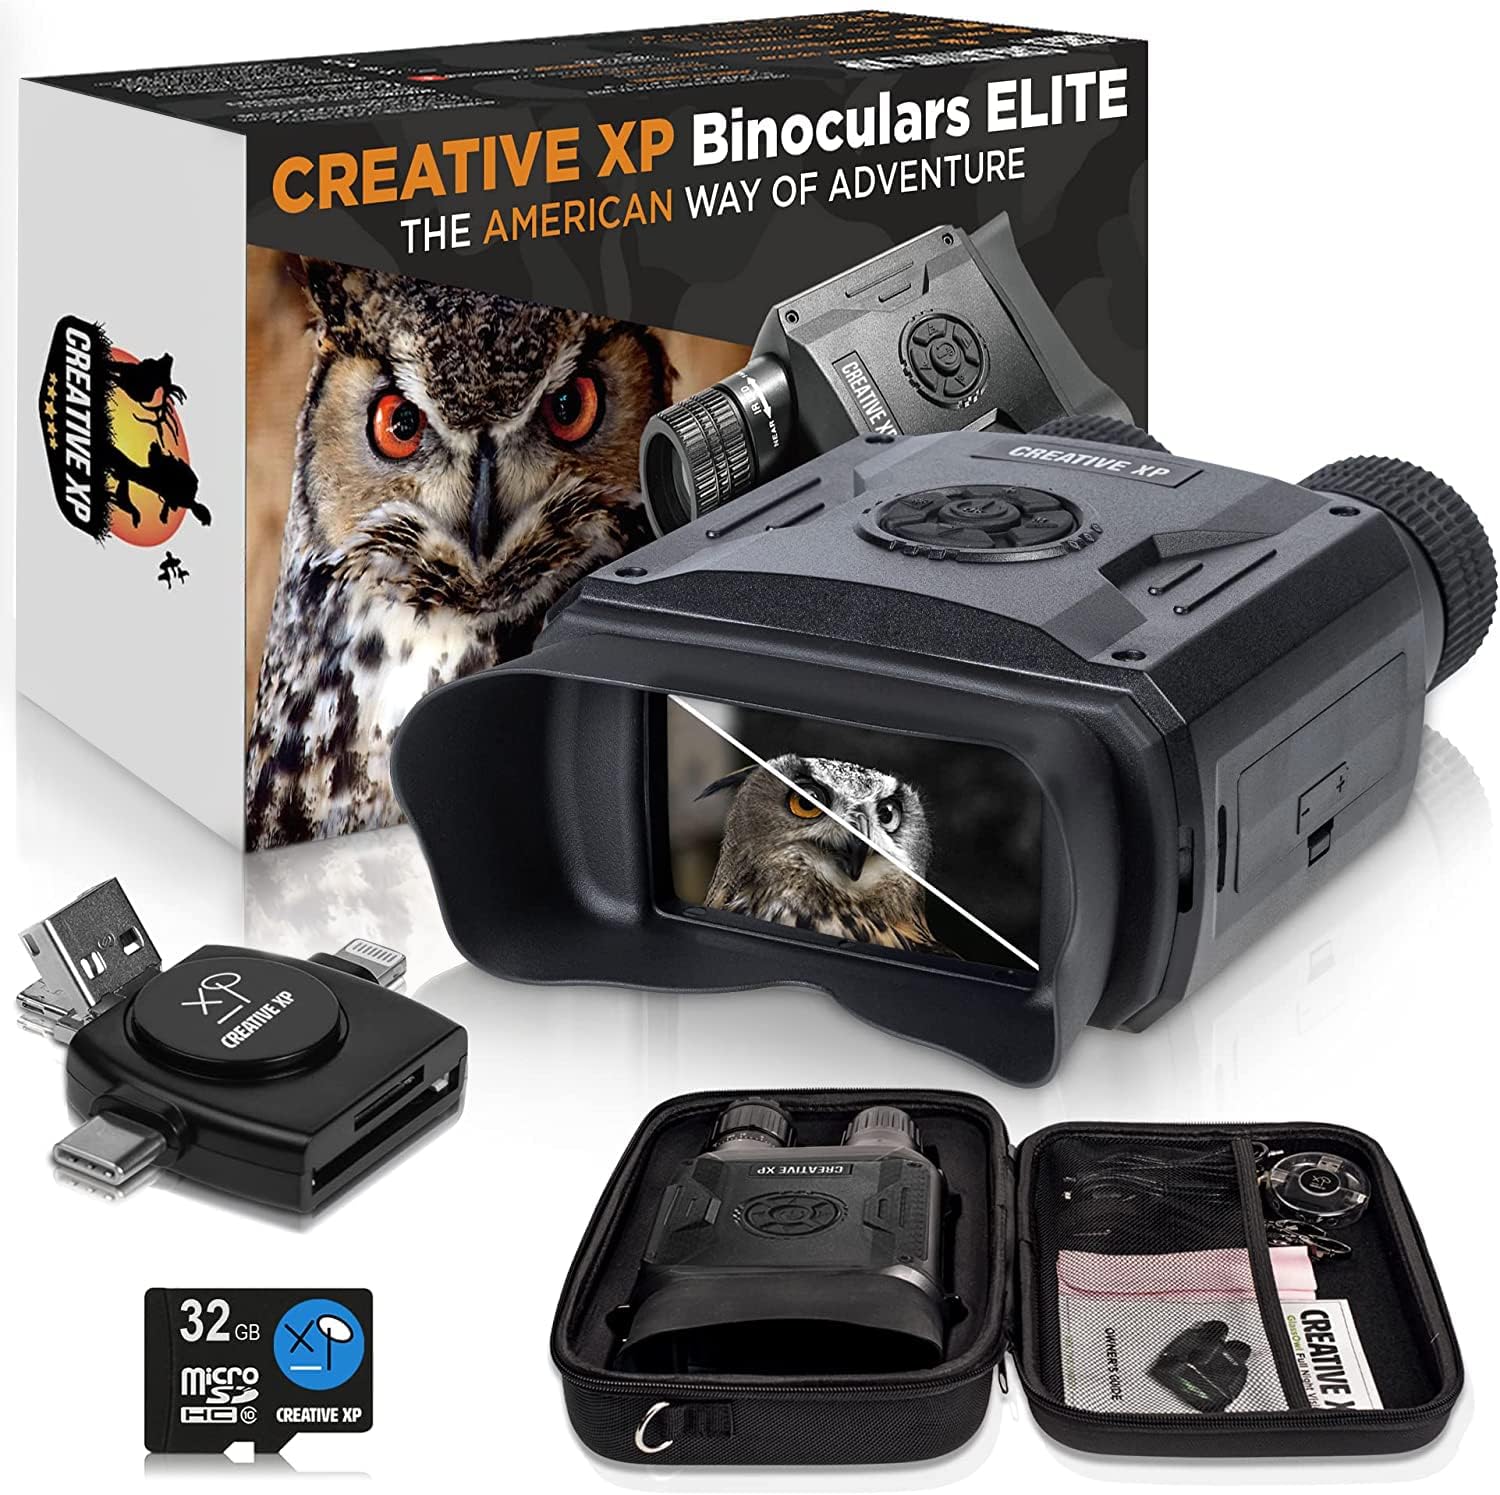 CREATIVE XP Night Vision Binoculars Elite - Digital Infrared, 2.31 Screen, 4X Zoom - Essential Deer Hunting Accessories, Tactical Gear, Security Goggles, Military Grade - 128GB Card, Neck Strap, Case